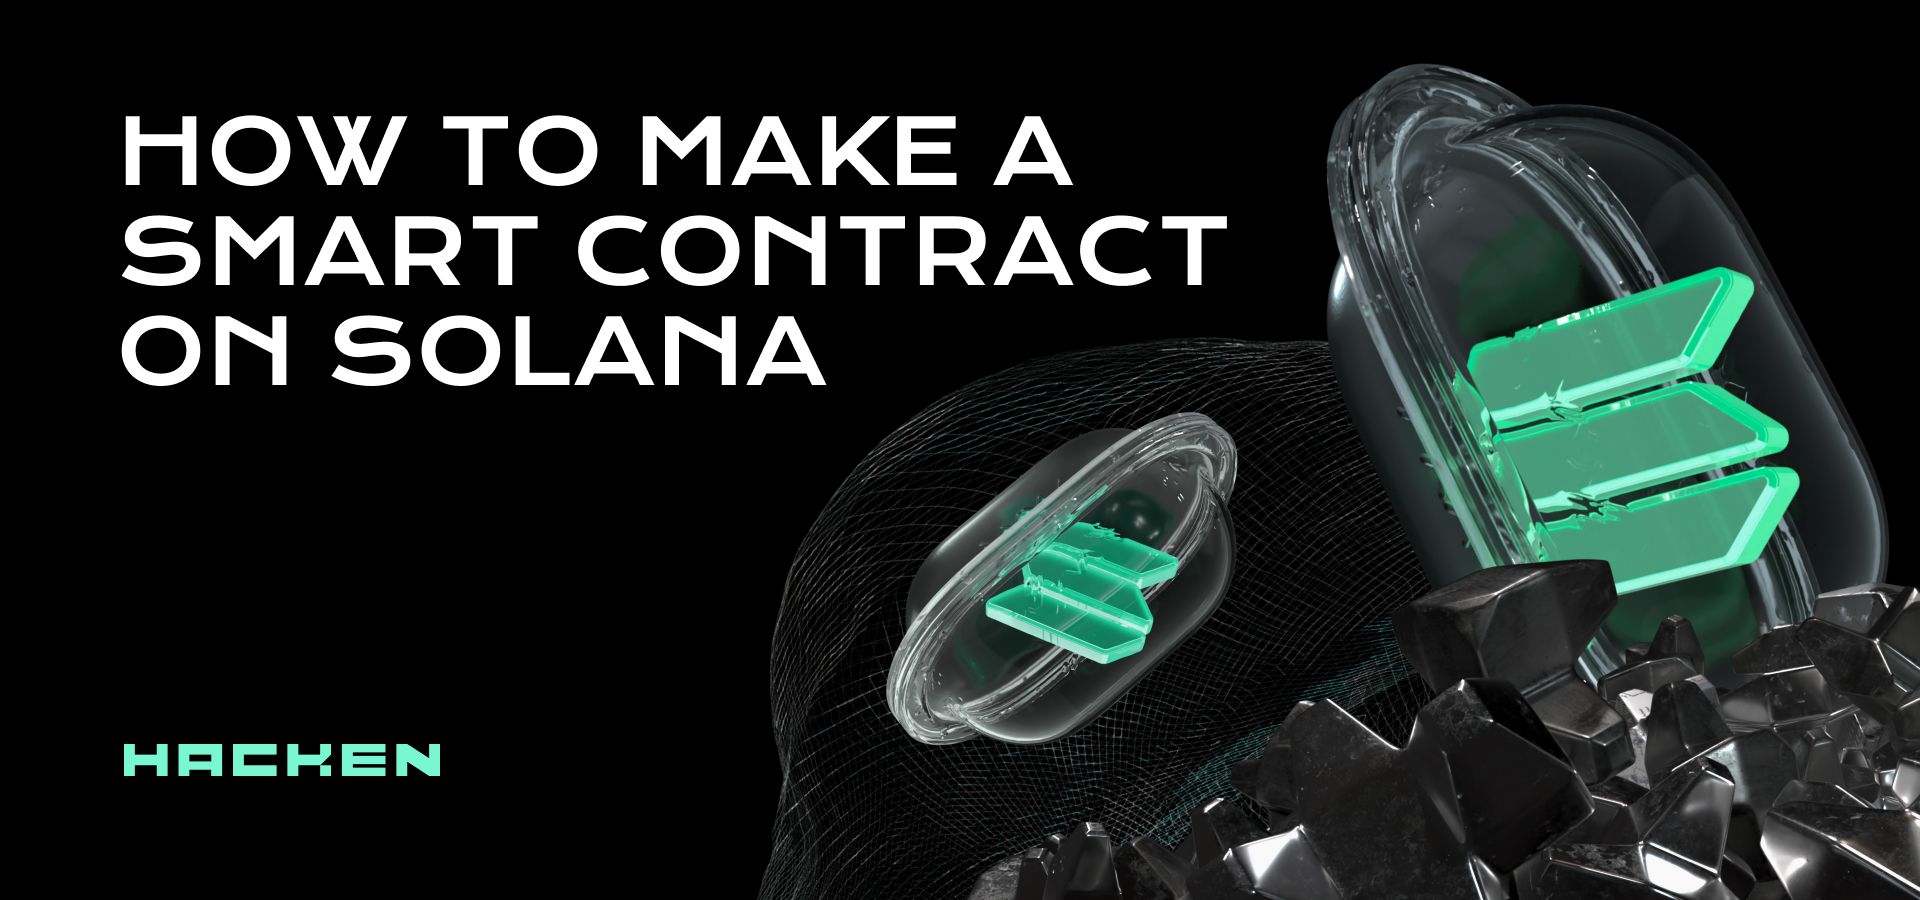 Building and Securing Solana Smart Contracts